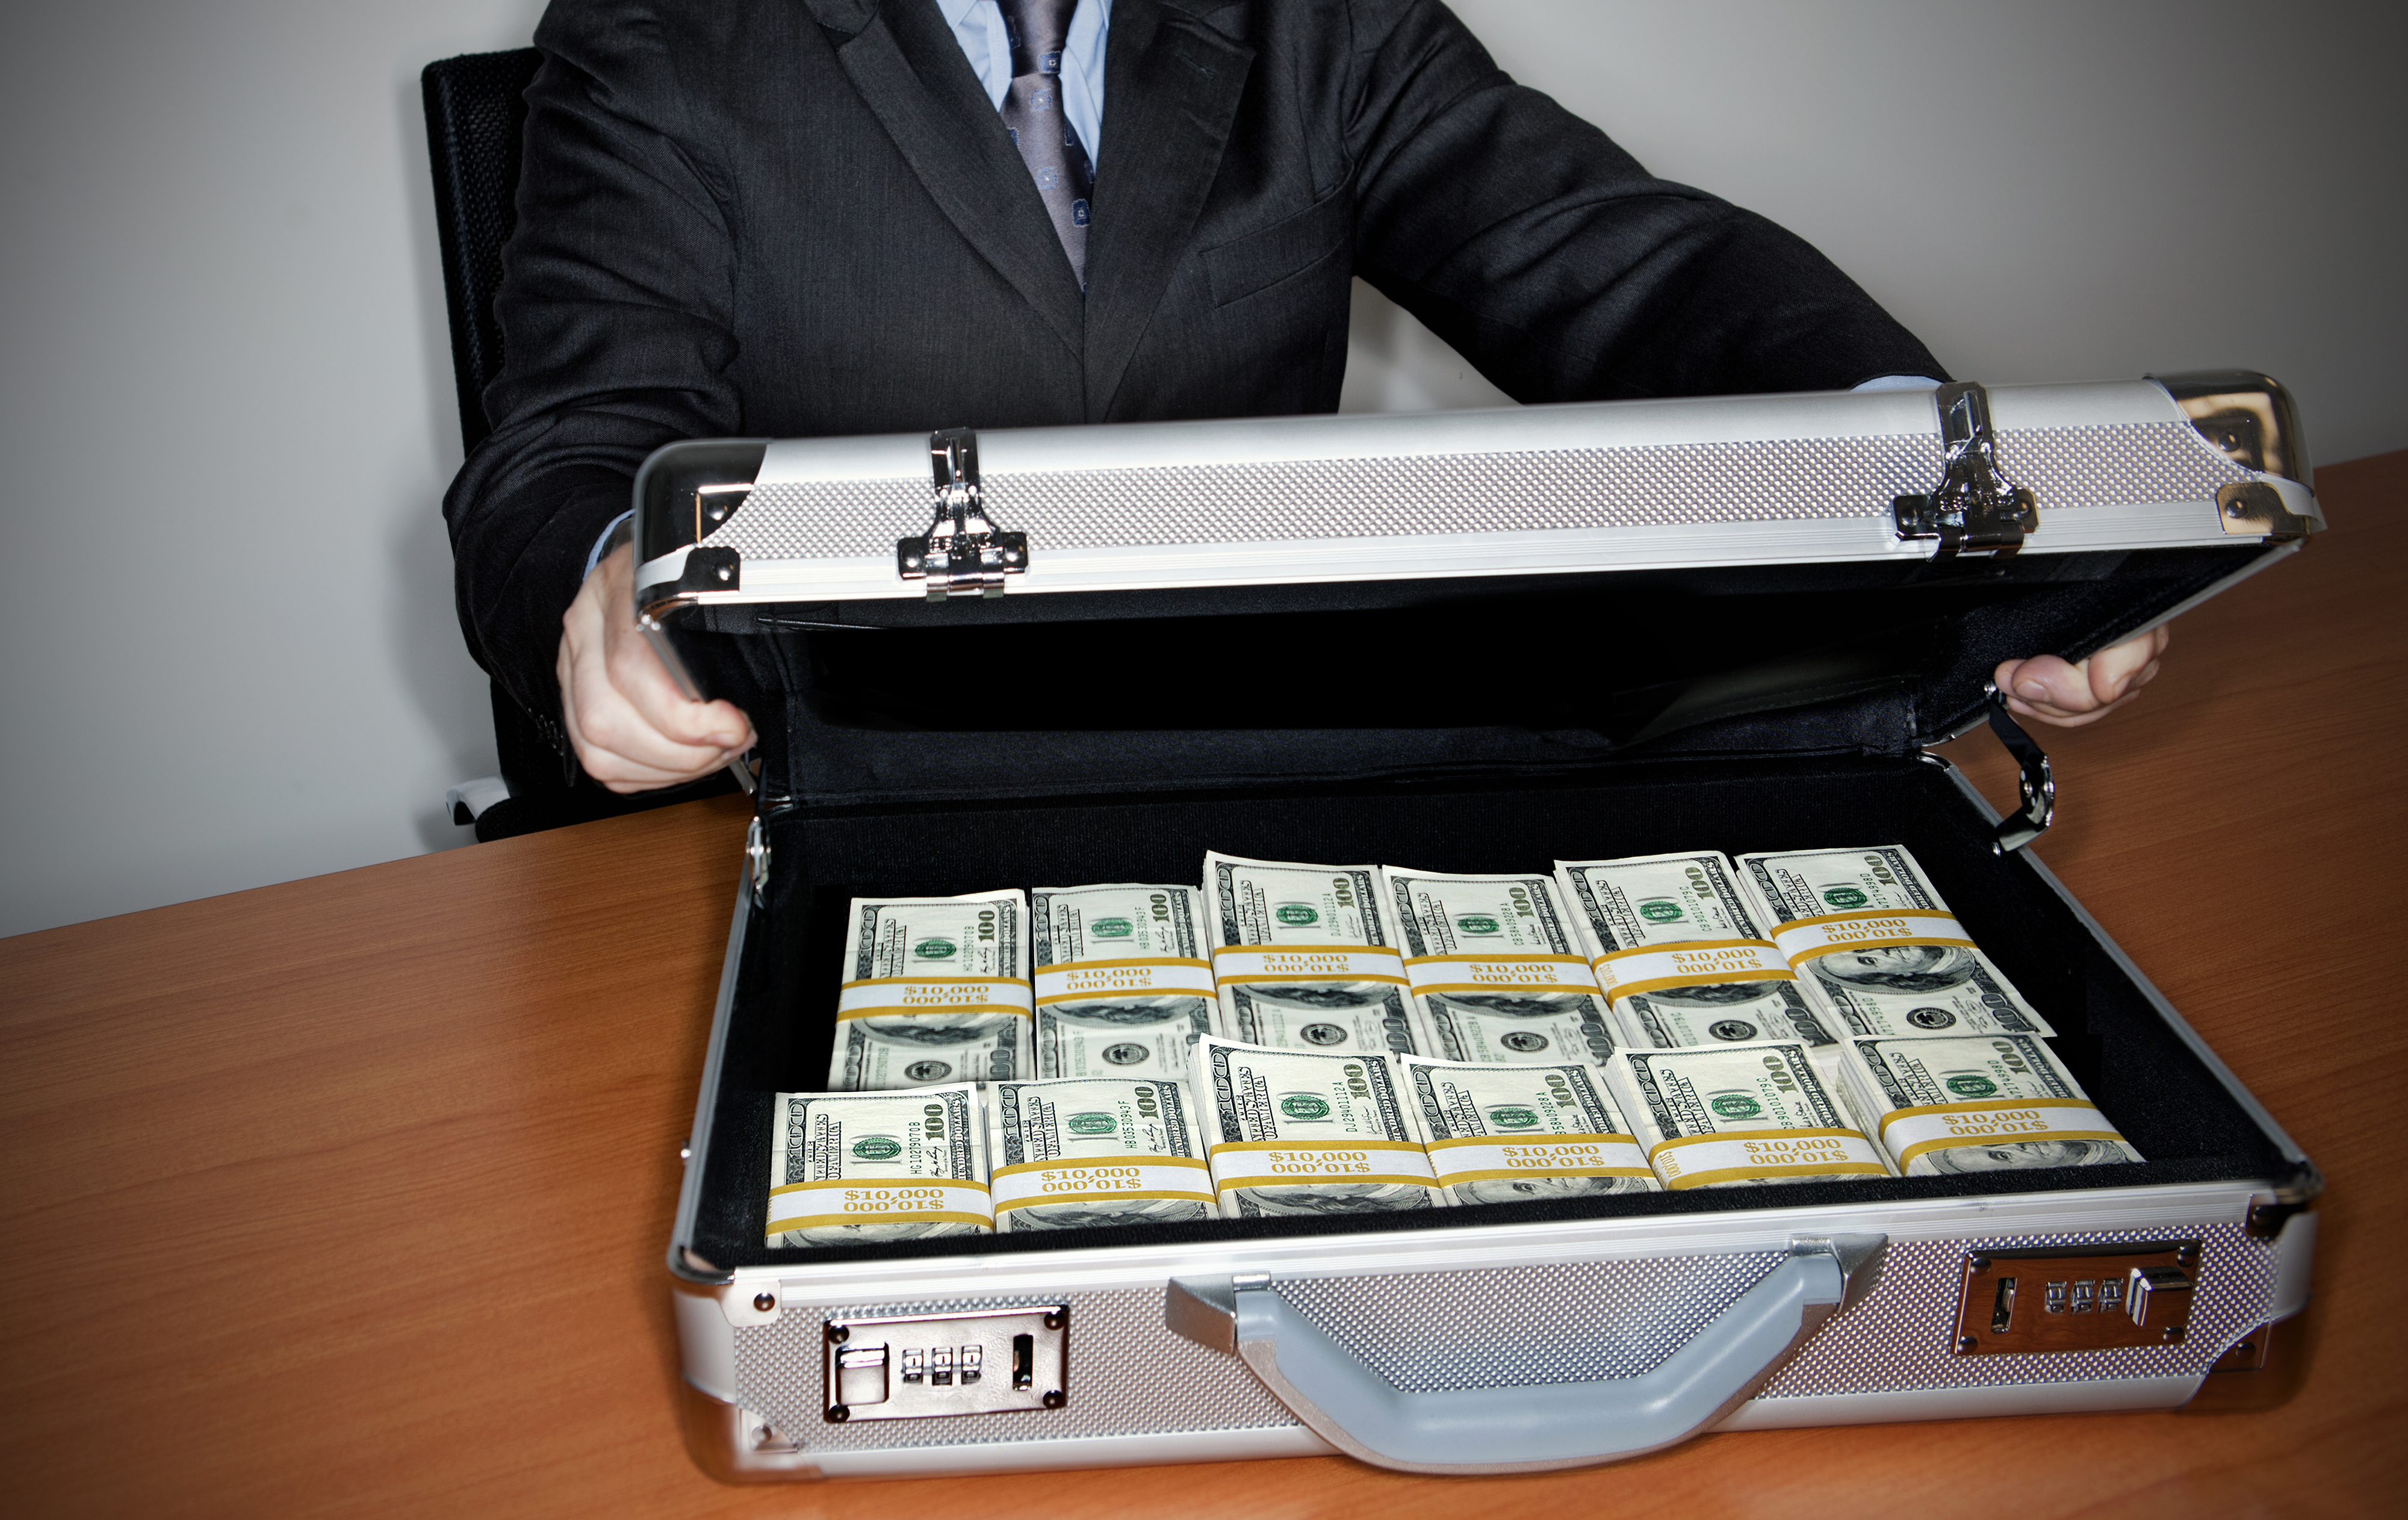 Person opening suitcase full of cash on a table, suggesting expensive travel or opulent lifestyle